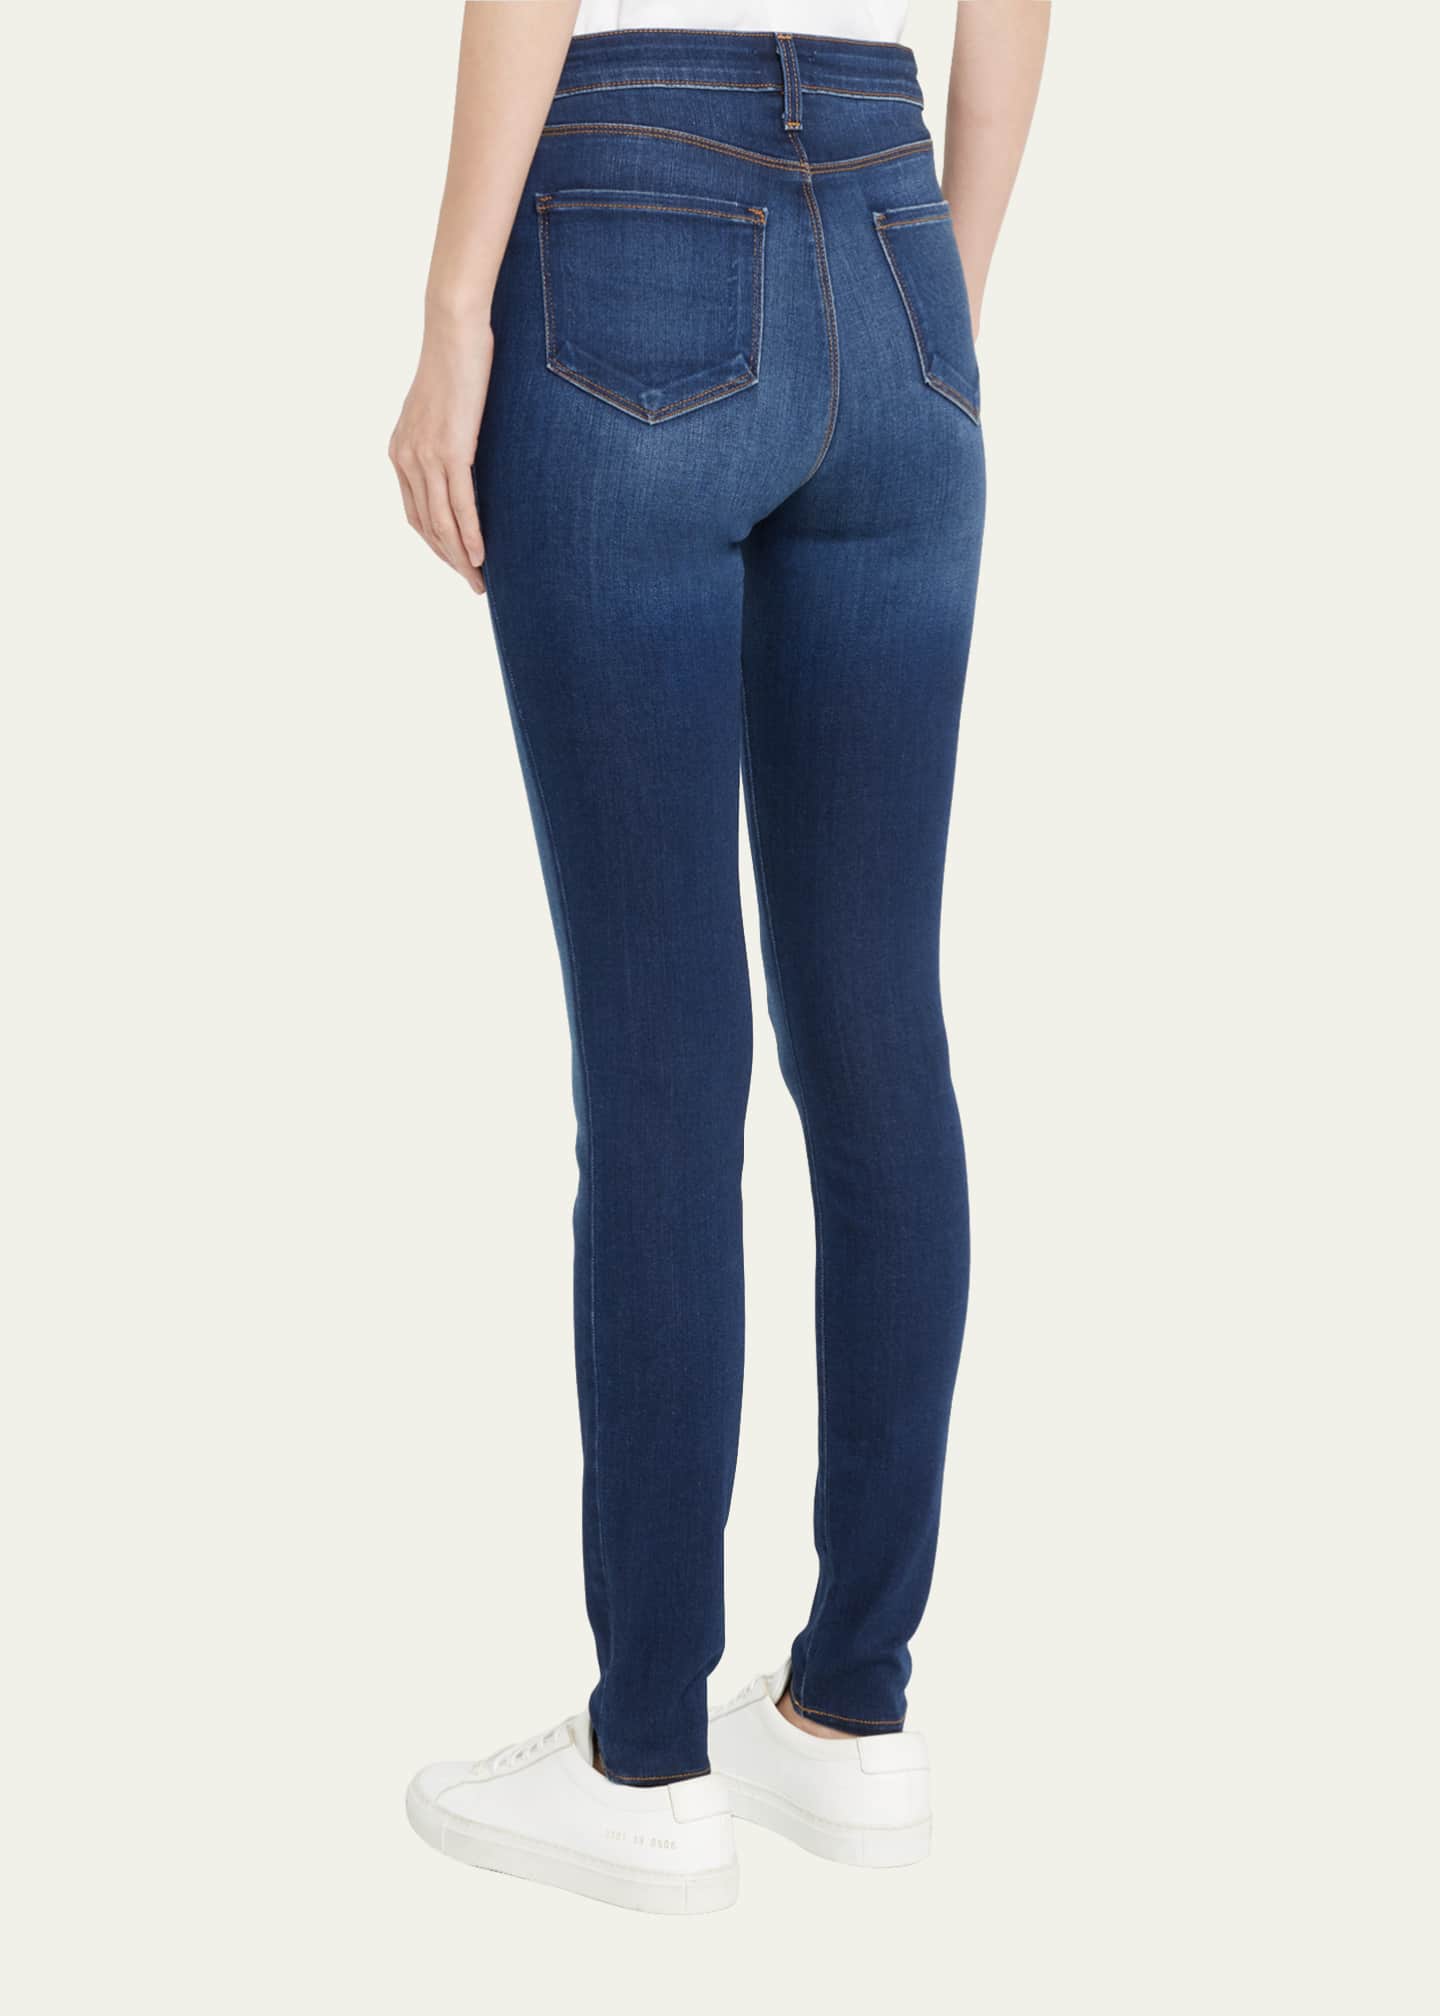 L'Agence Marguerite High-Rise Ankle Skinny Jeans - Bergdorf Goodman